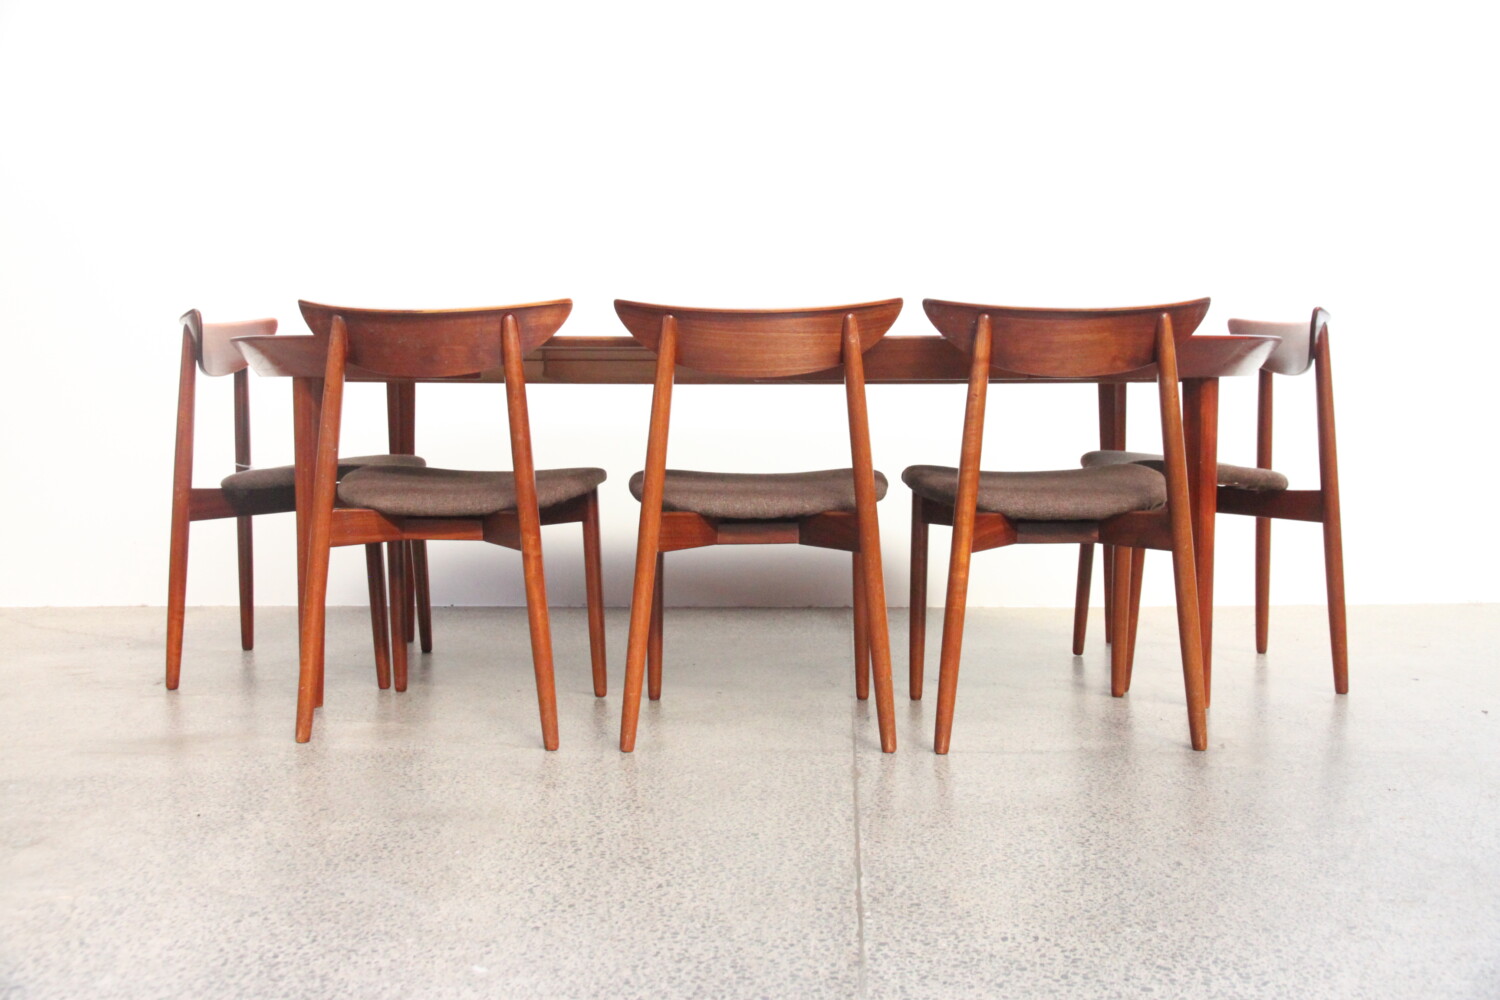 Teak Extendable Table by Ole Hald sold